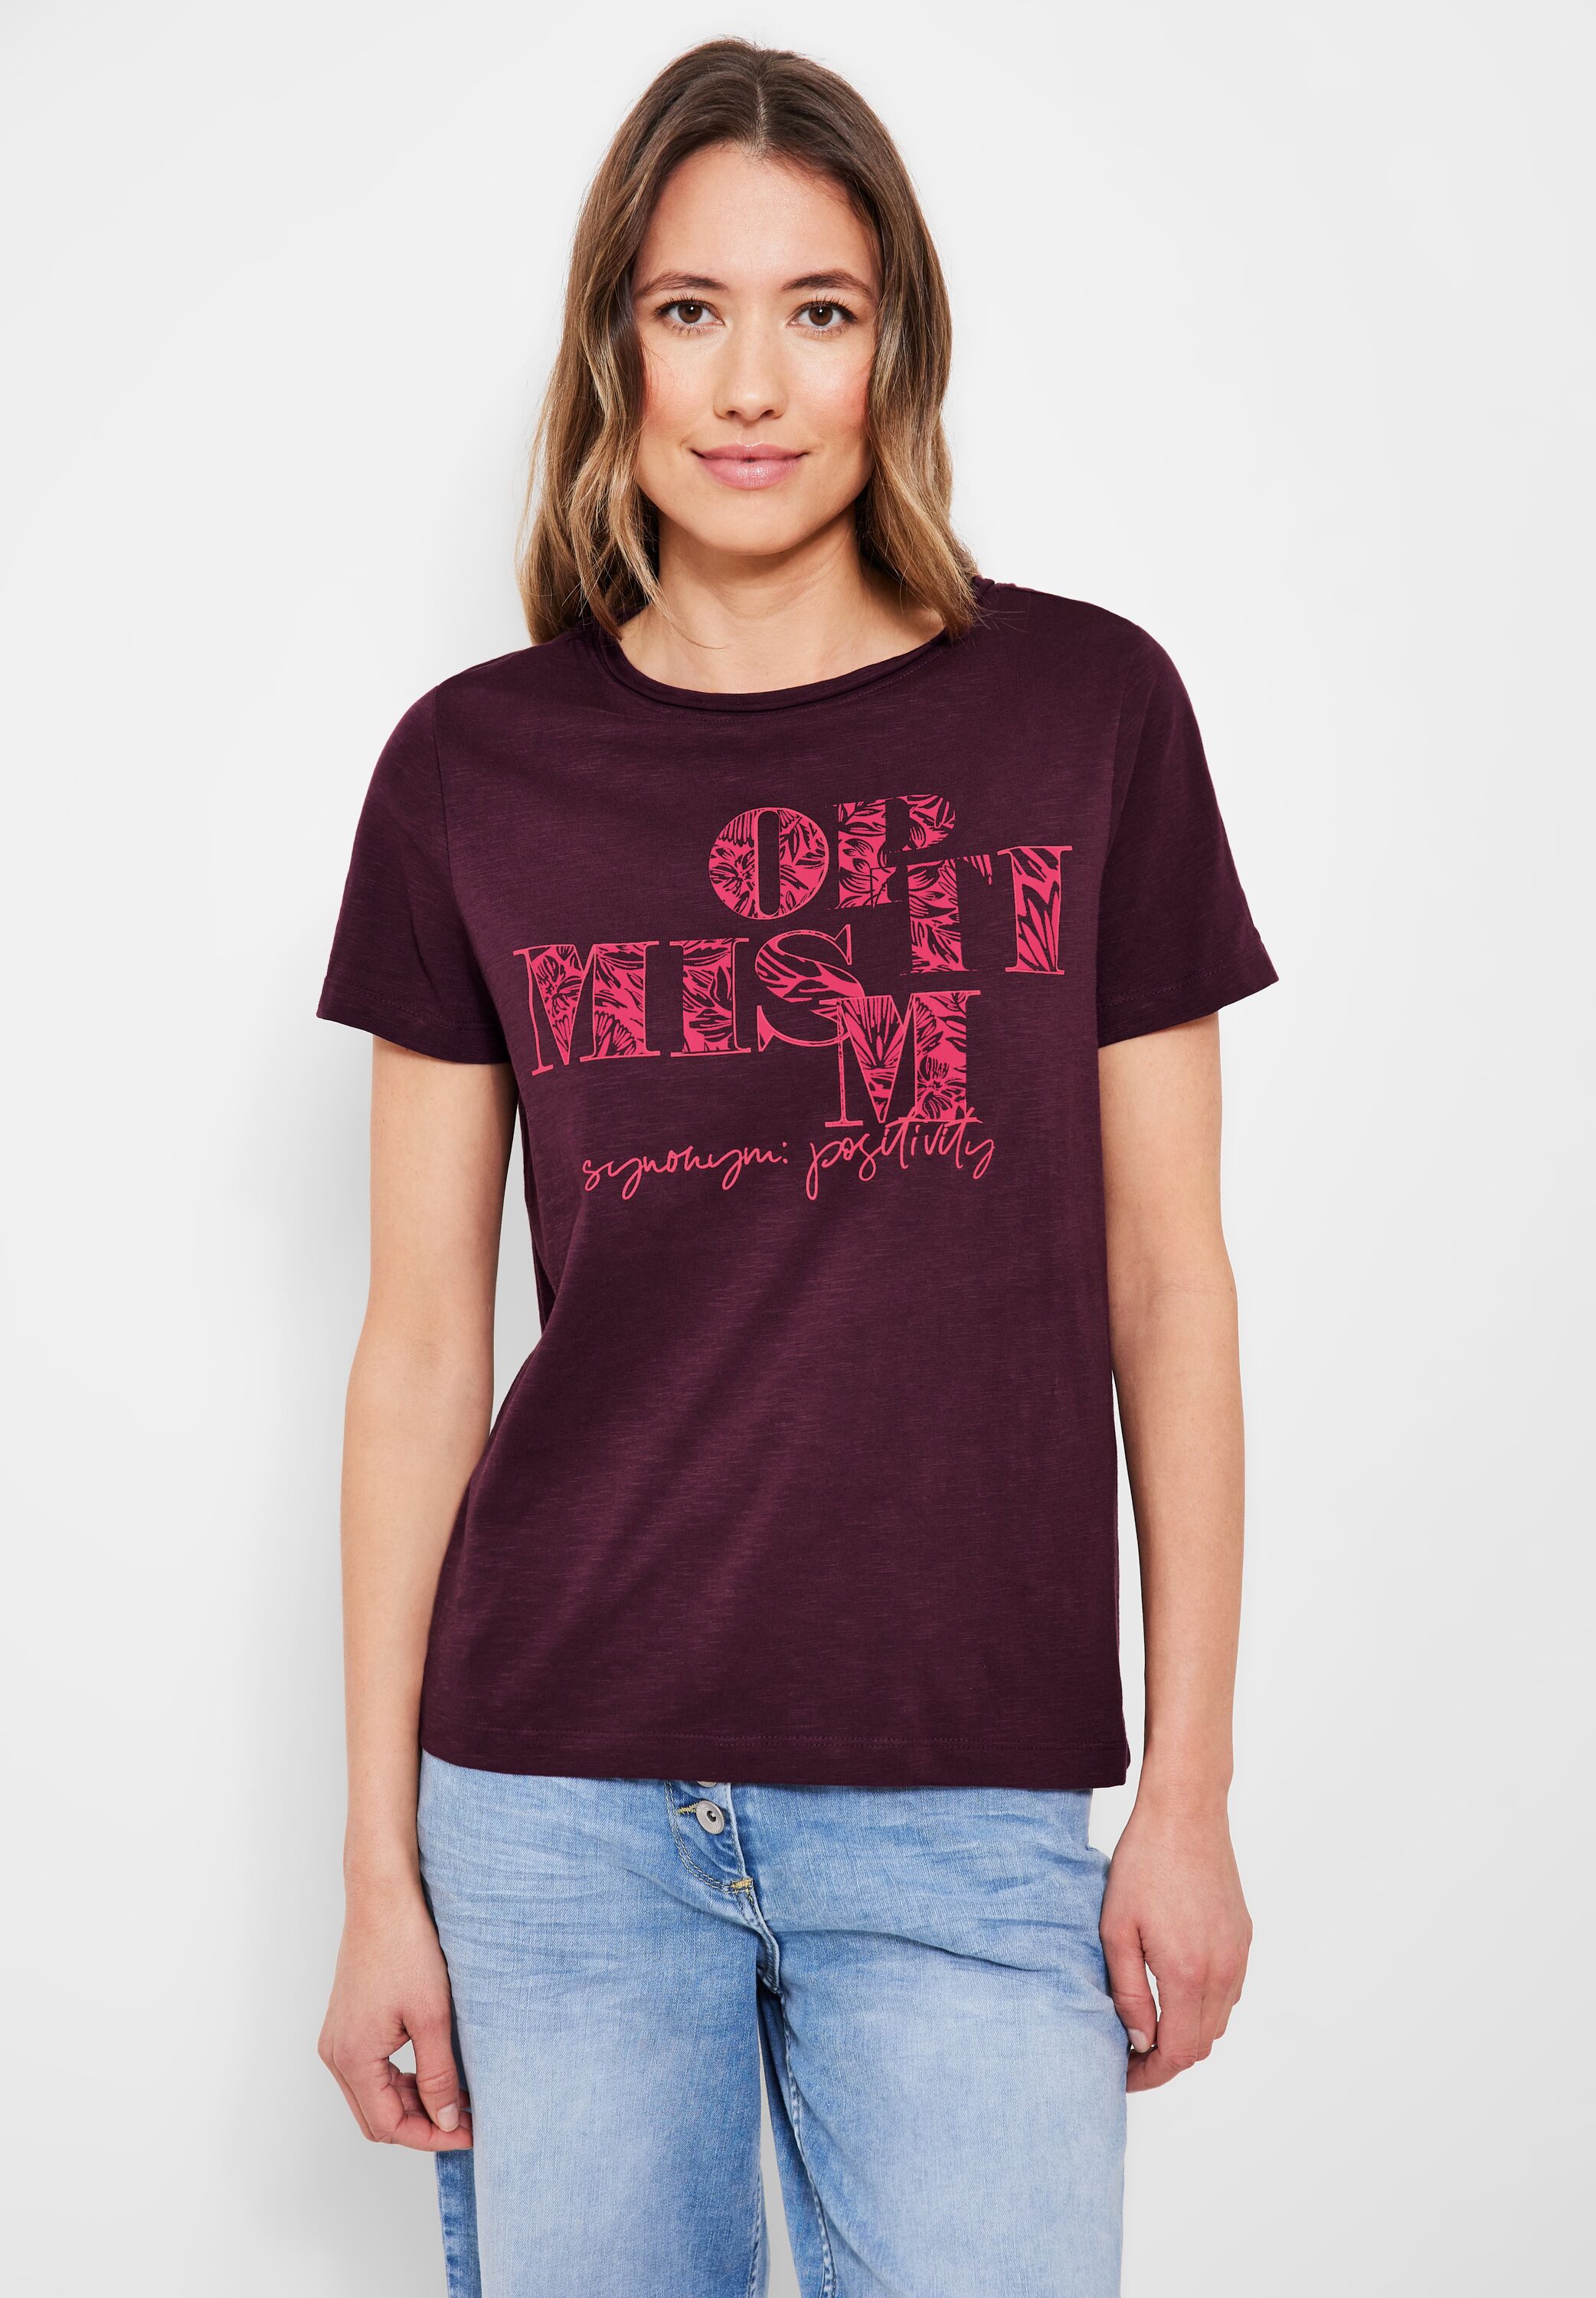 CECIL T-Shirt in Mode B319637-34918 reduziert Wineberry Red CONCEPT SALE - im